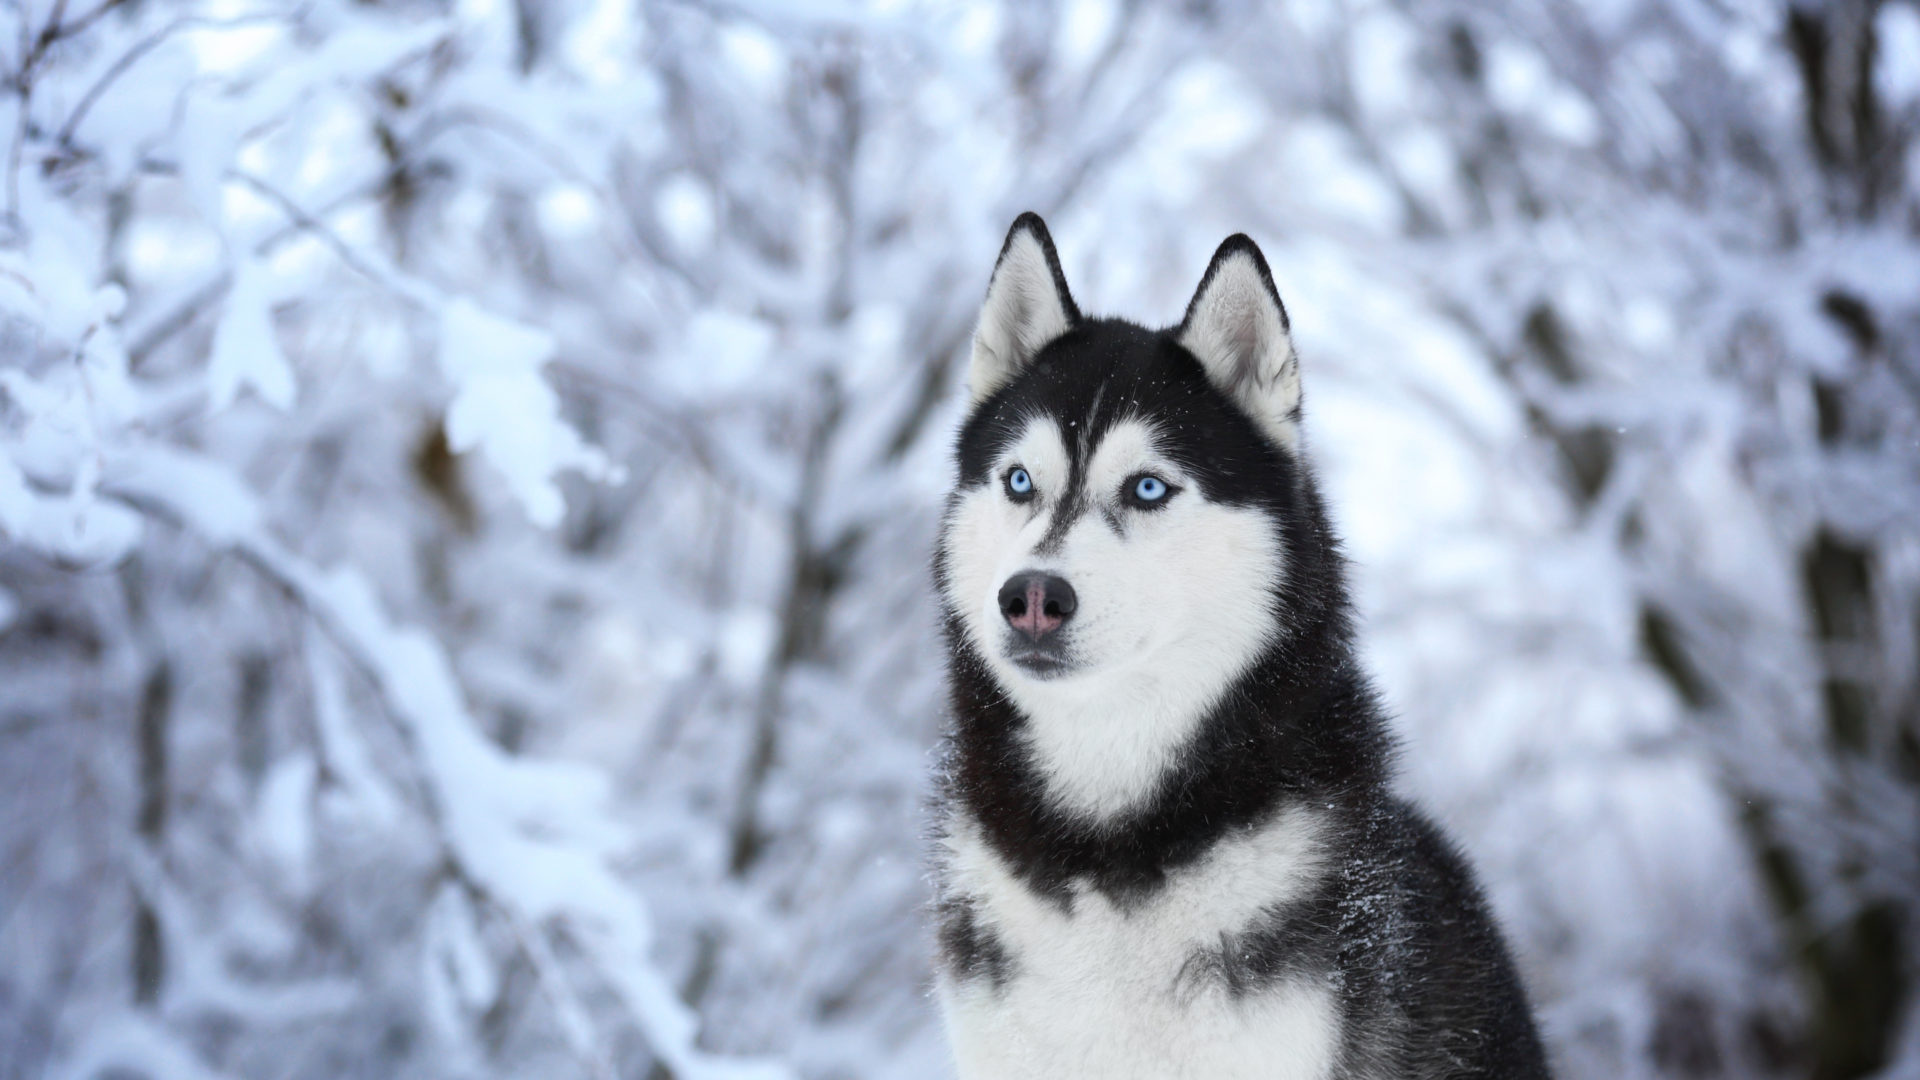 White and Black Siberian Husky on Snow Covered Ground. Wallpaper in 1920x1080 Resolution